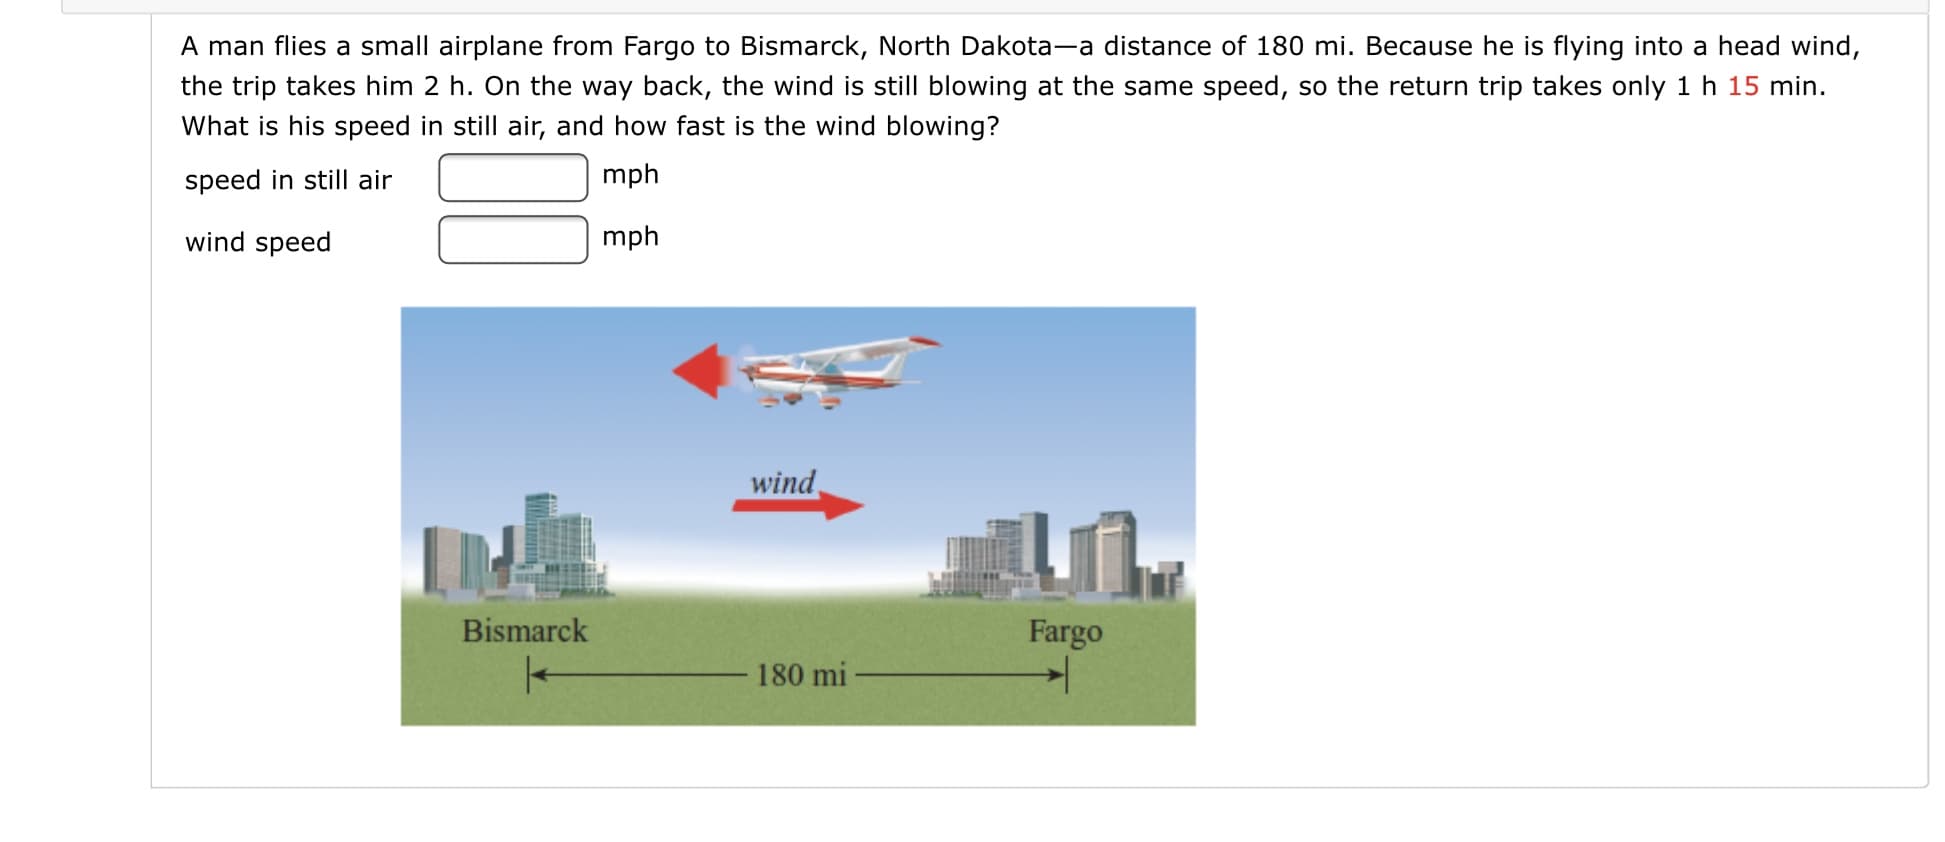 A man flies a small airplane from Fargo to Bismarck, North Dakota-a distance of 180 mi. Because he is flying into a head wind,
the trip takes him 2 h. On the way back, the wind is still blowing at the same speed, so the return trip takes only 1 h 15 min.
What is his speed in still air, and how fast is the wind blowing?
speed in still air
mph
wind speed
mph
wind
INA
Bismarck
Fargo
180 mi
